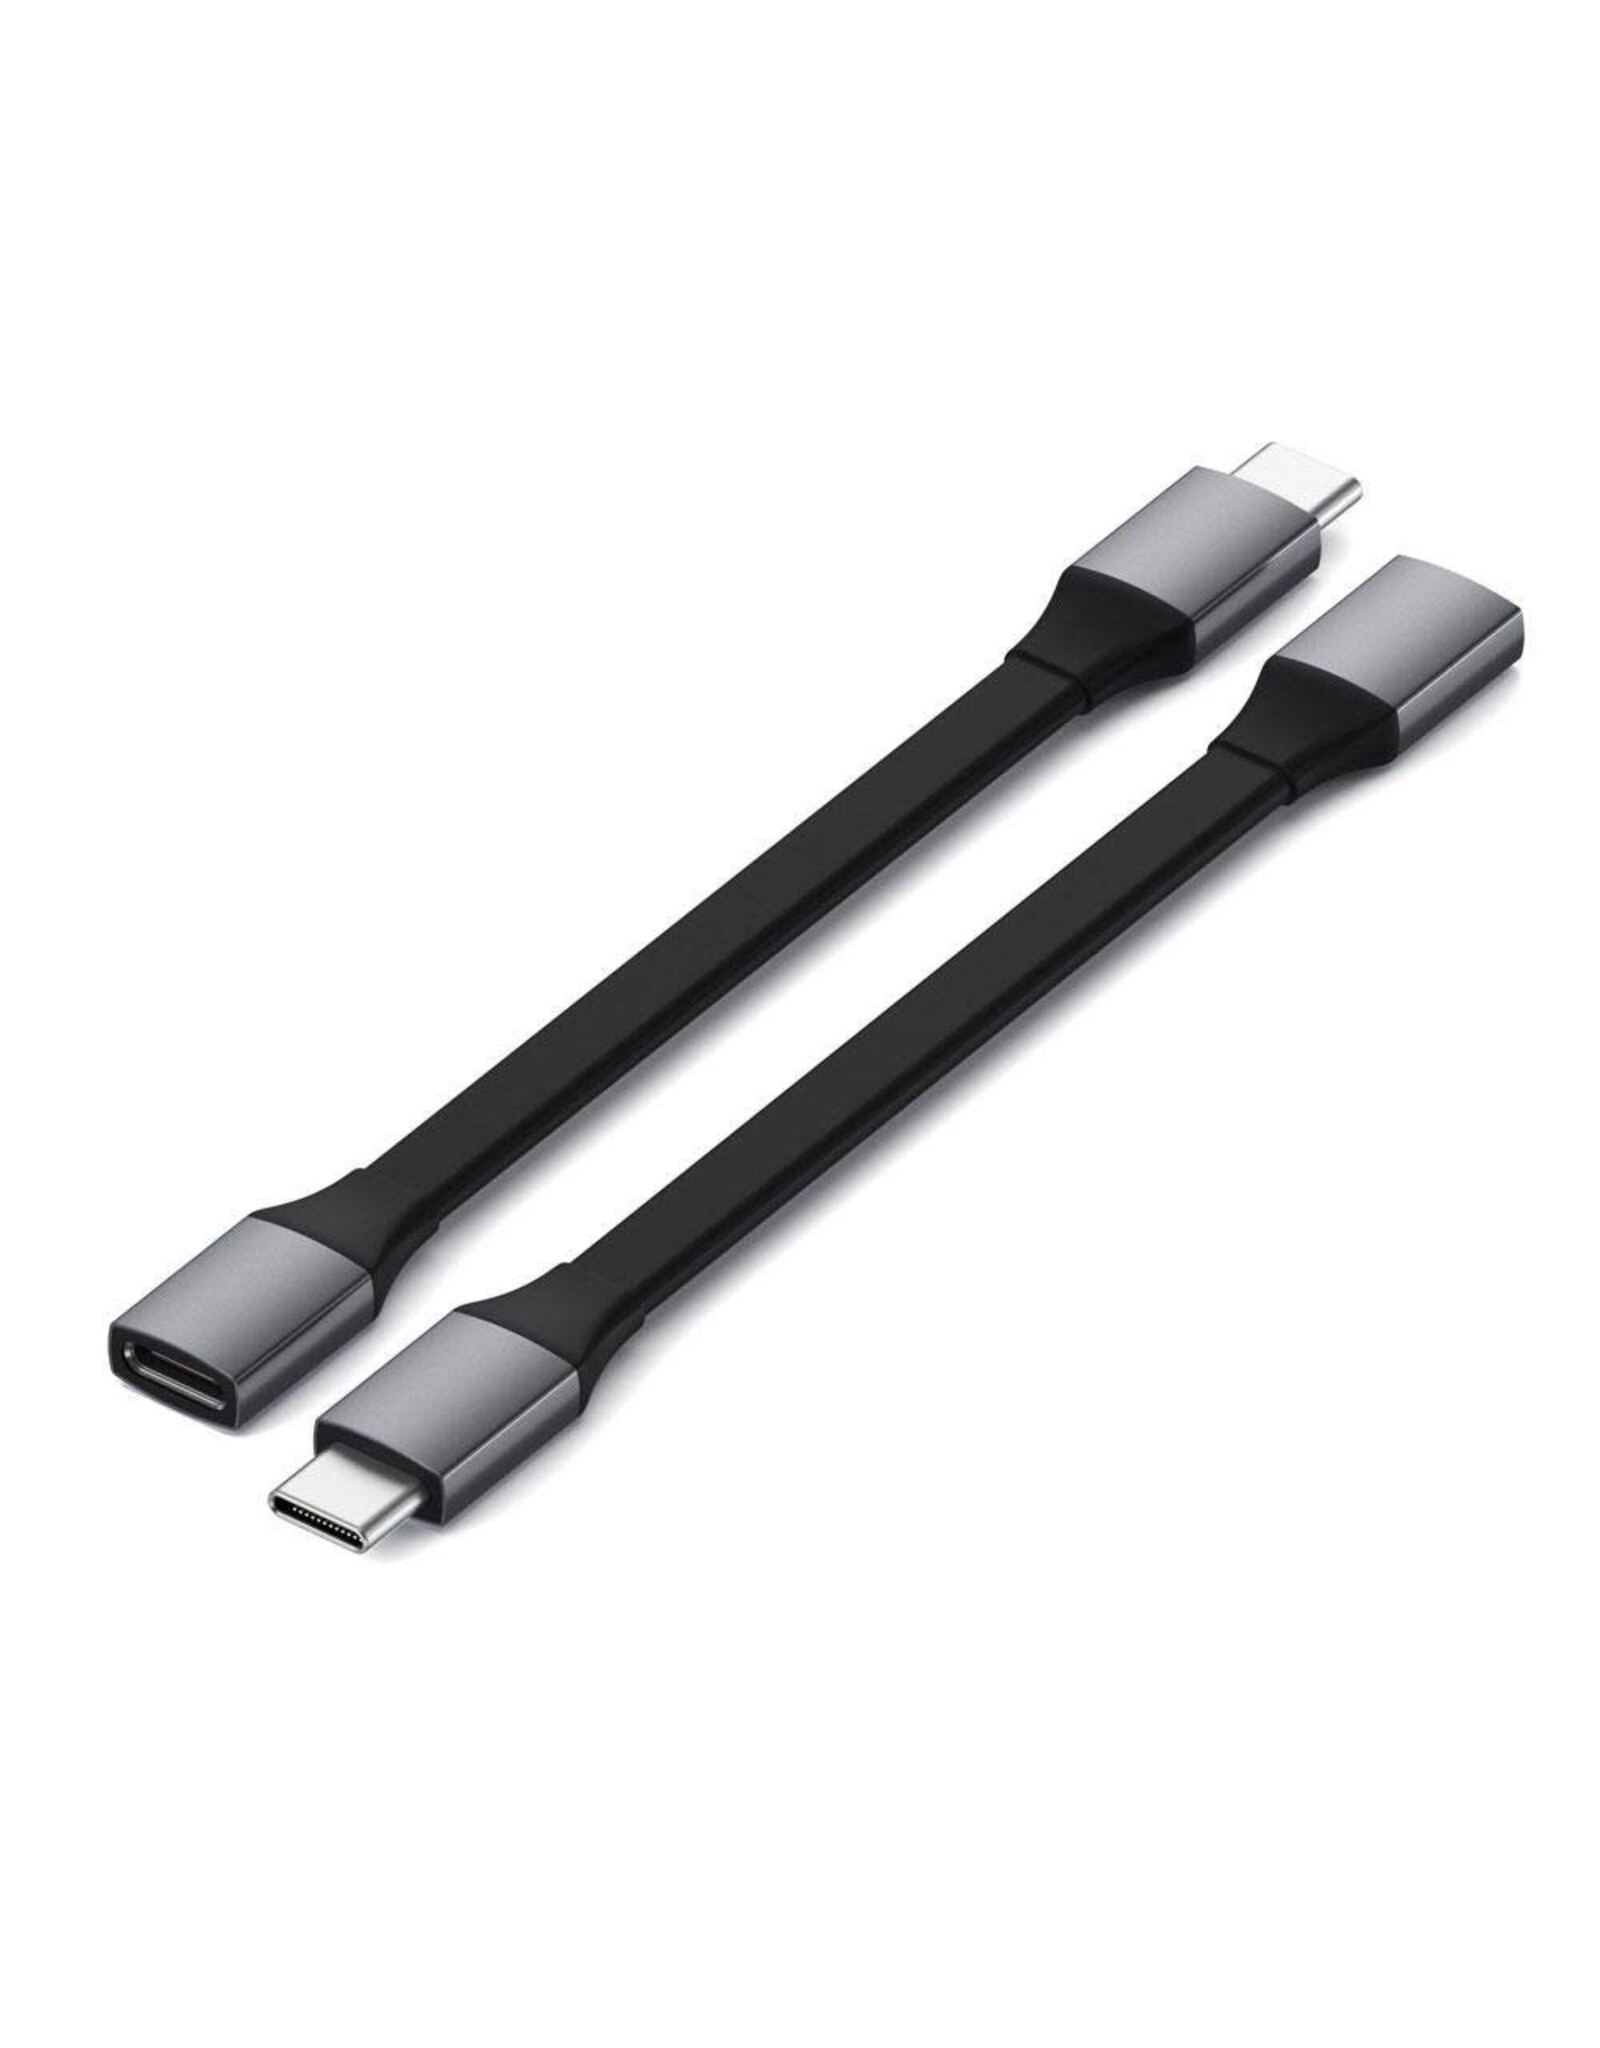 Satechi Satechi USB-C Mini Extension Cable for Magnetic Charging Dock